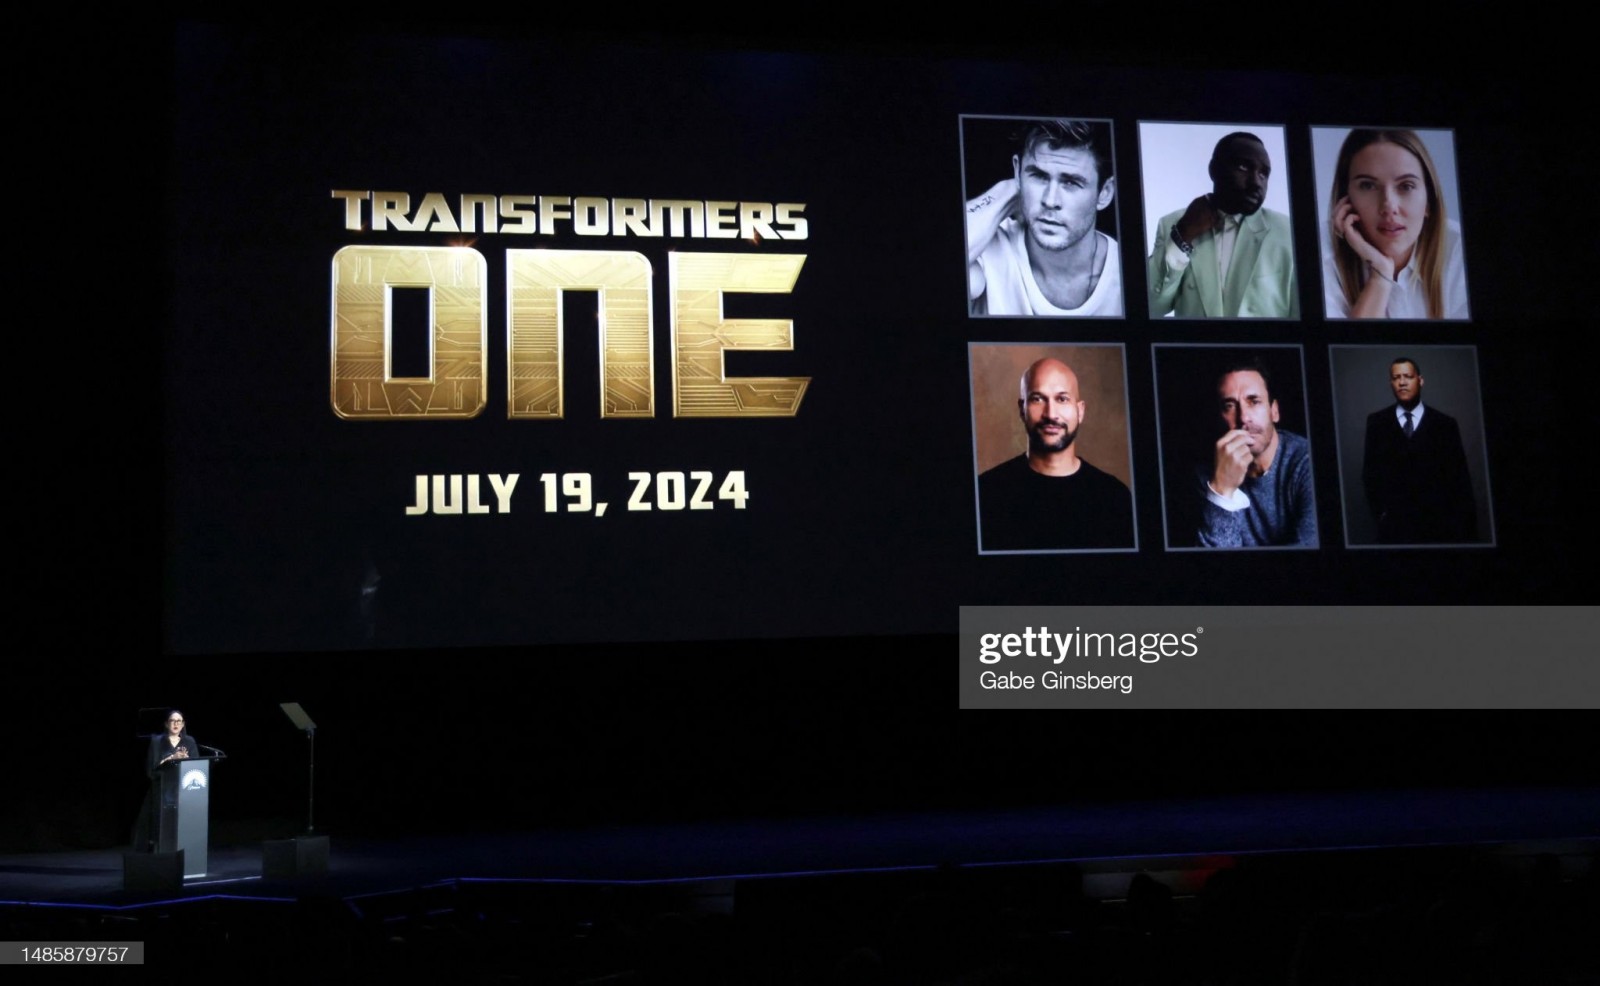 First Look at Transformers One Animated Film Through Concept Image